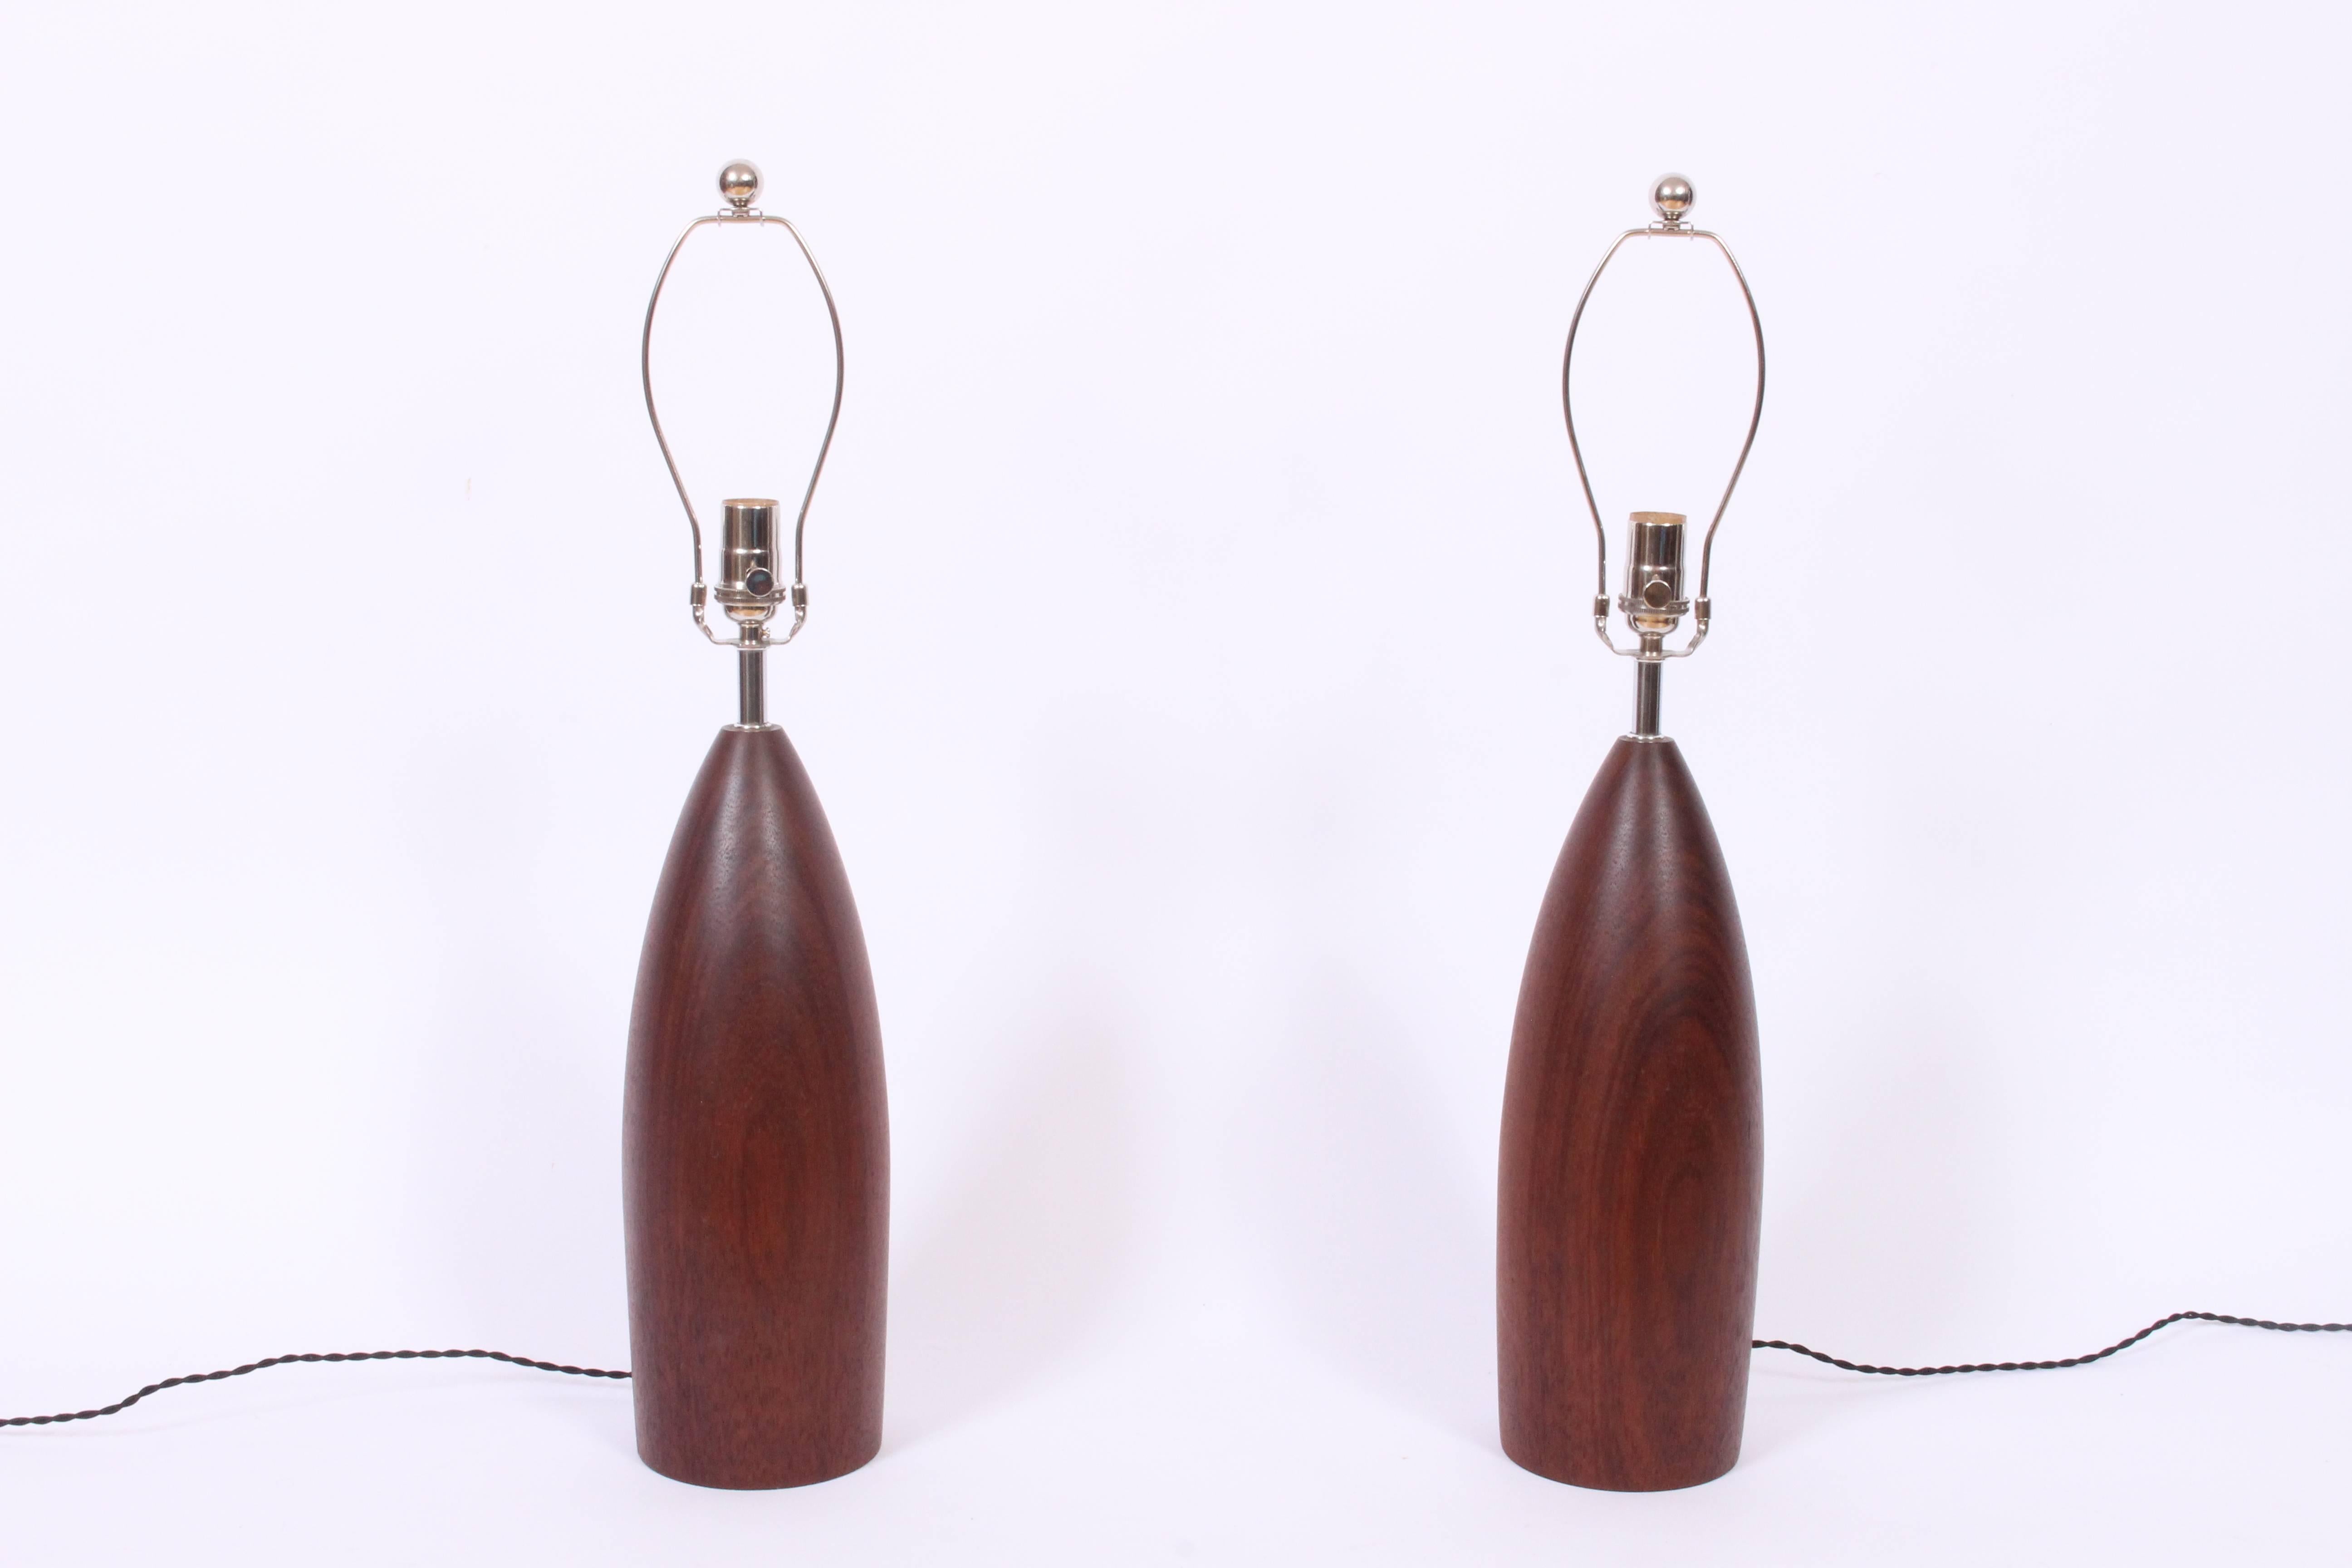 Large pair of Scandinavian Modern deep brown tapered solid Teak Table Lamps. Beautifully turned smooth bullet form. 21 H to top of socket. Shades shown for display only (9.5 H x 12 D top x 13 D bottom). Rewired with new nickel-plated hardware and